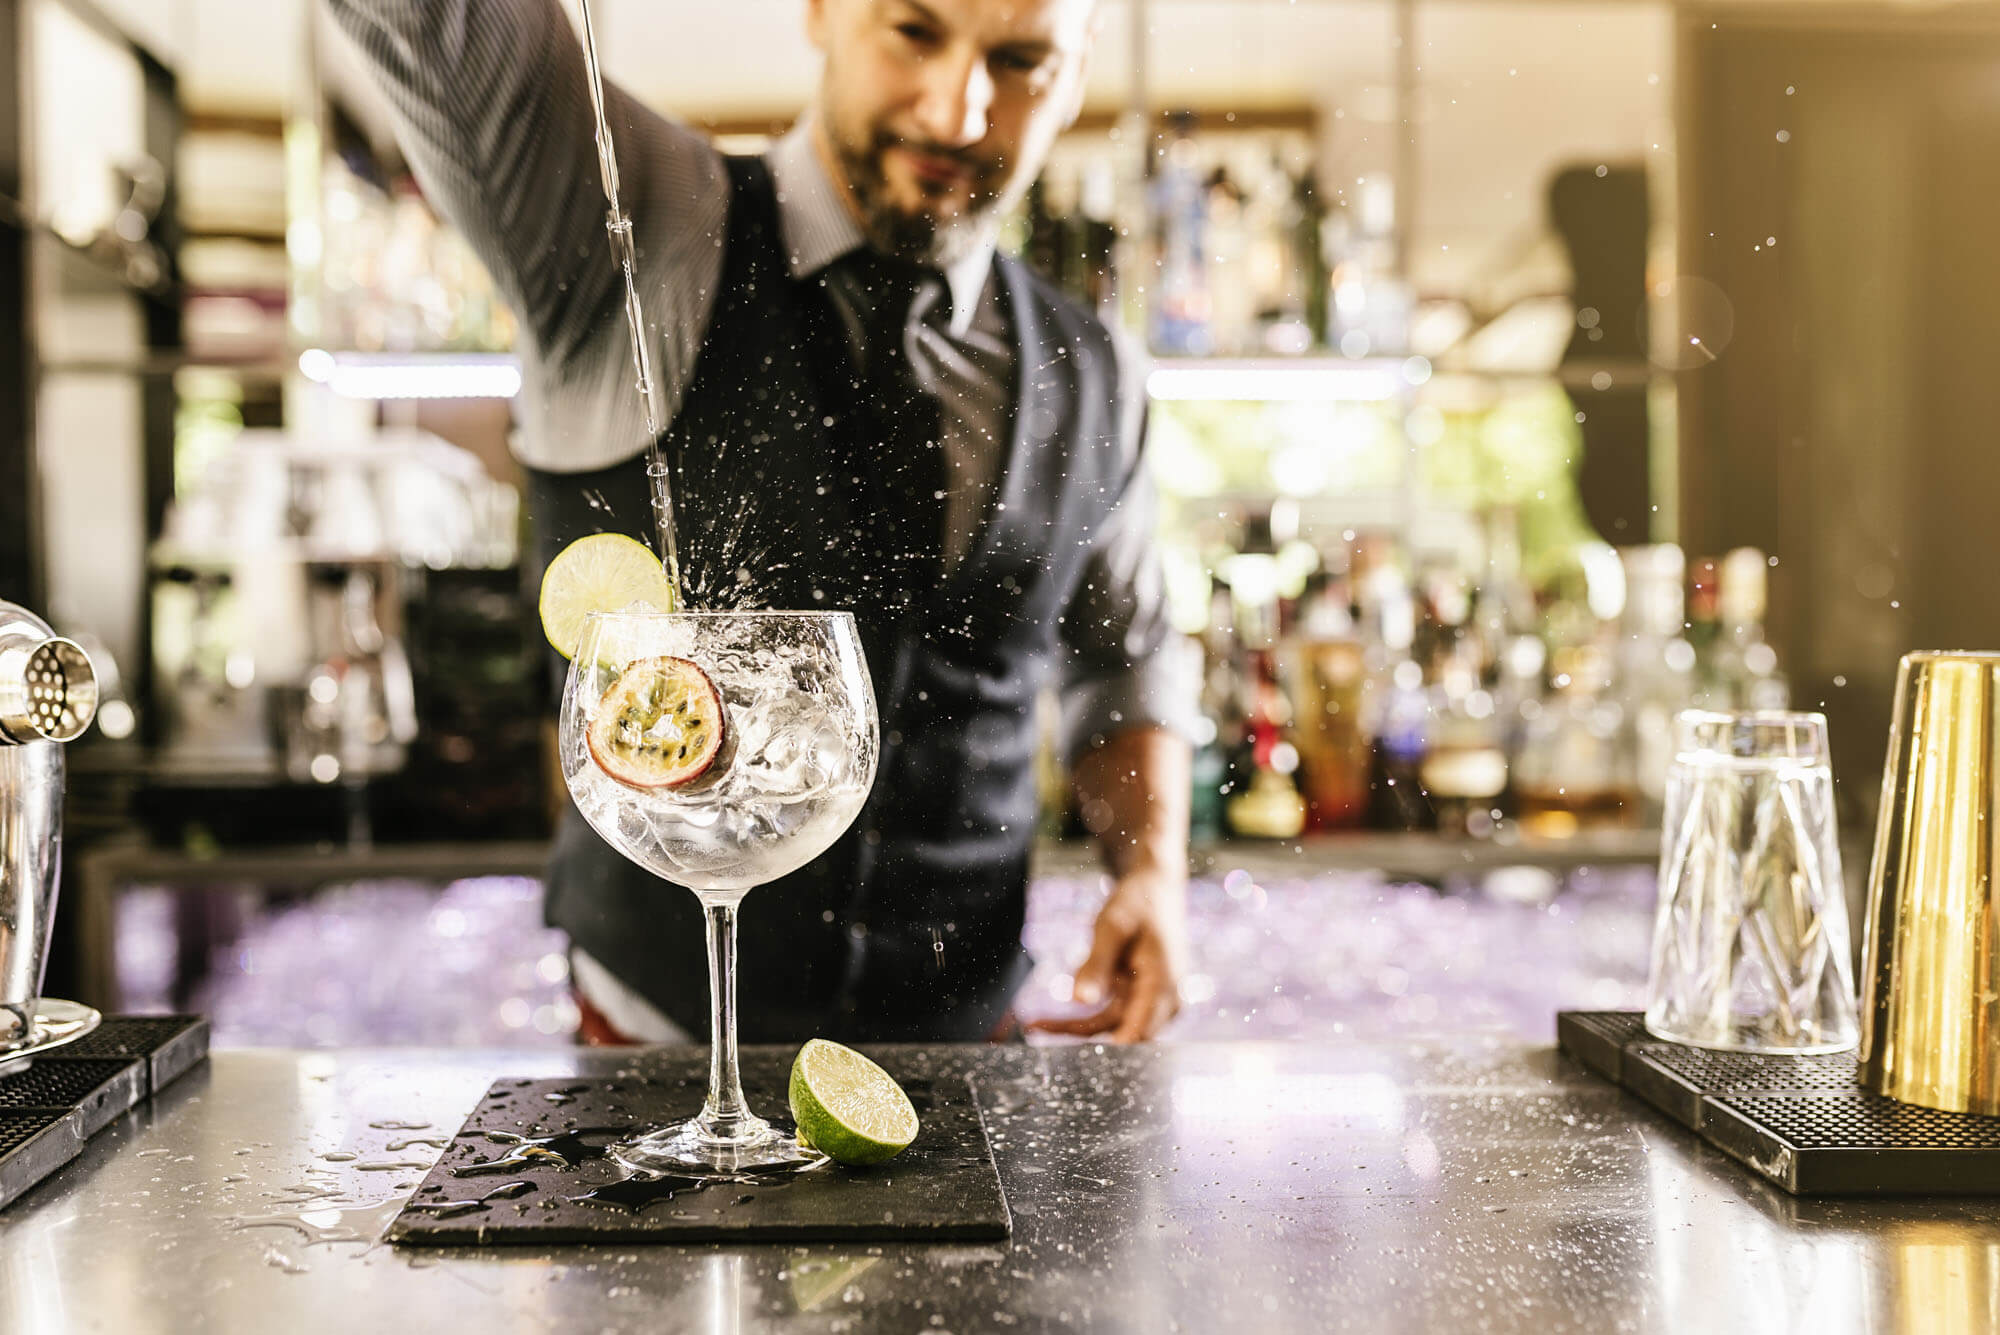 Bartender pouring a drink and splashing the bar